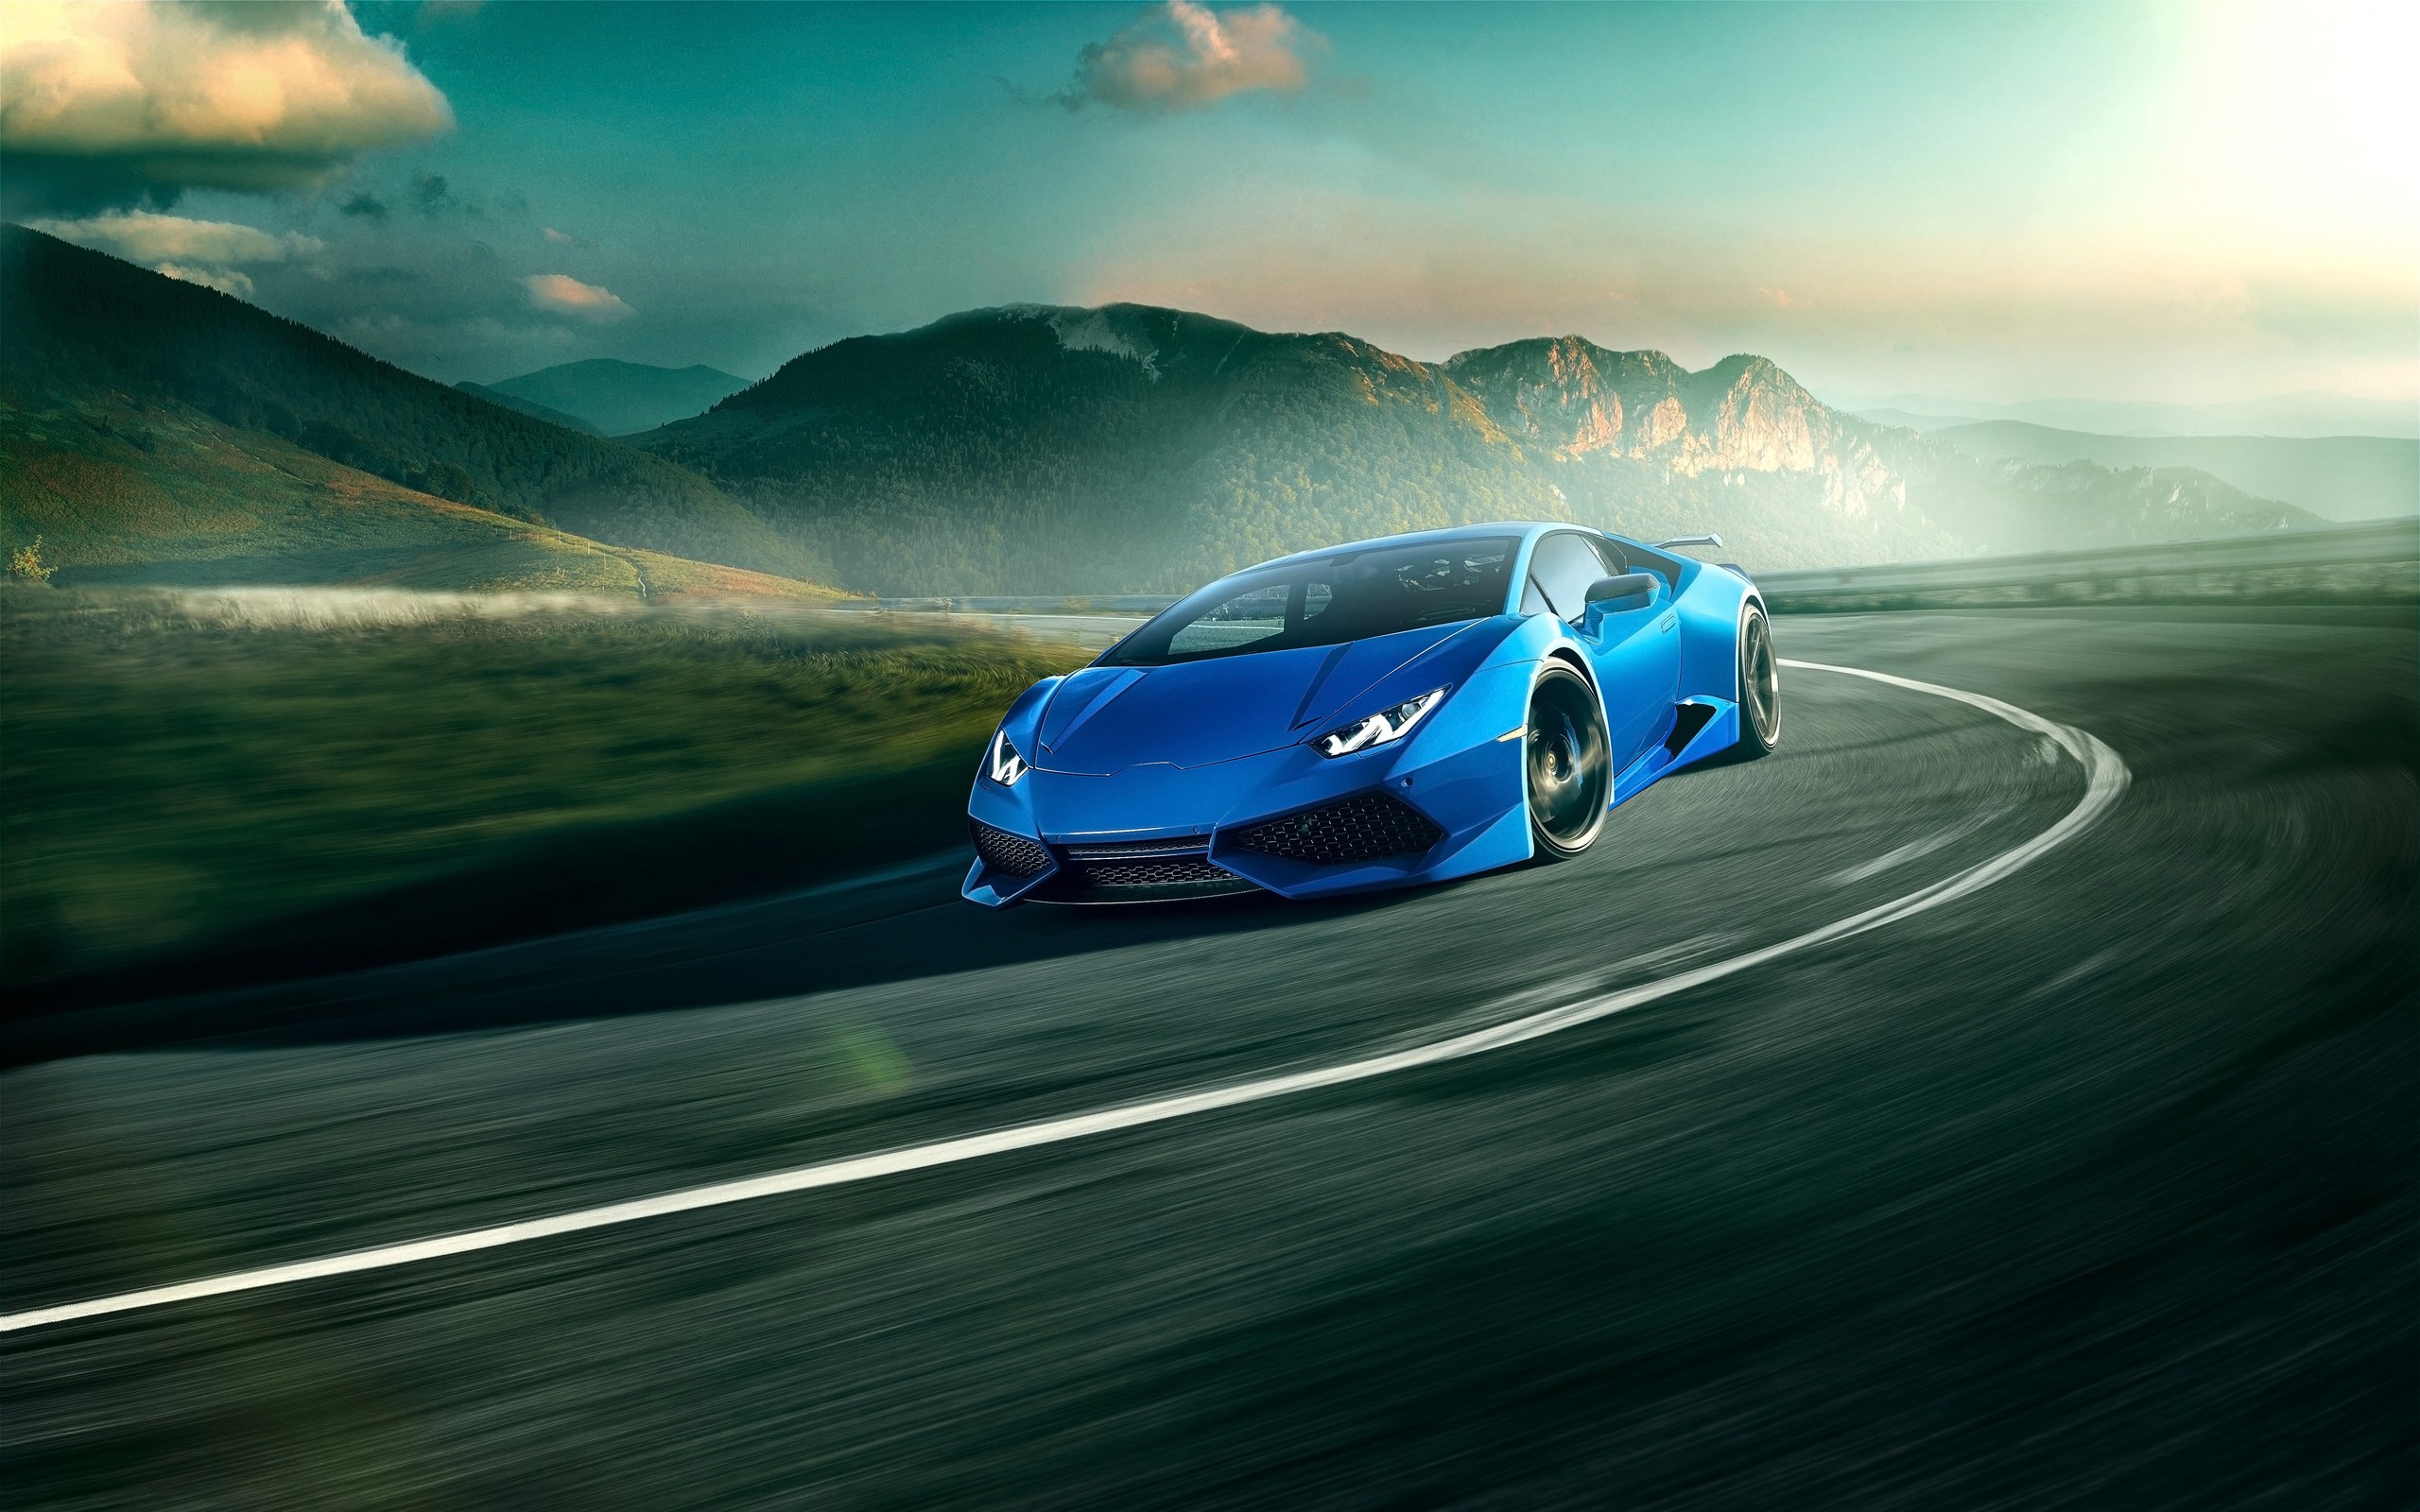 Wallpapers car vehicle sports car on the desktop